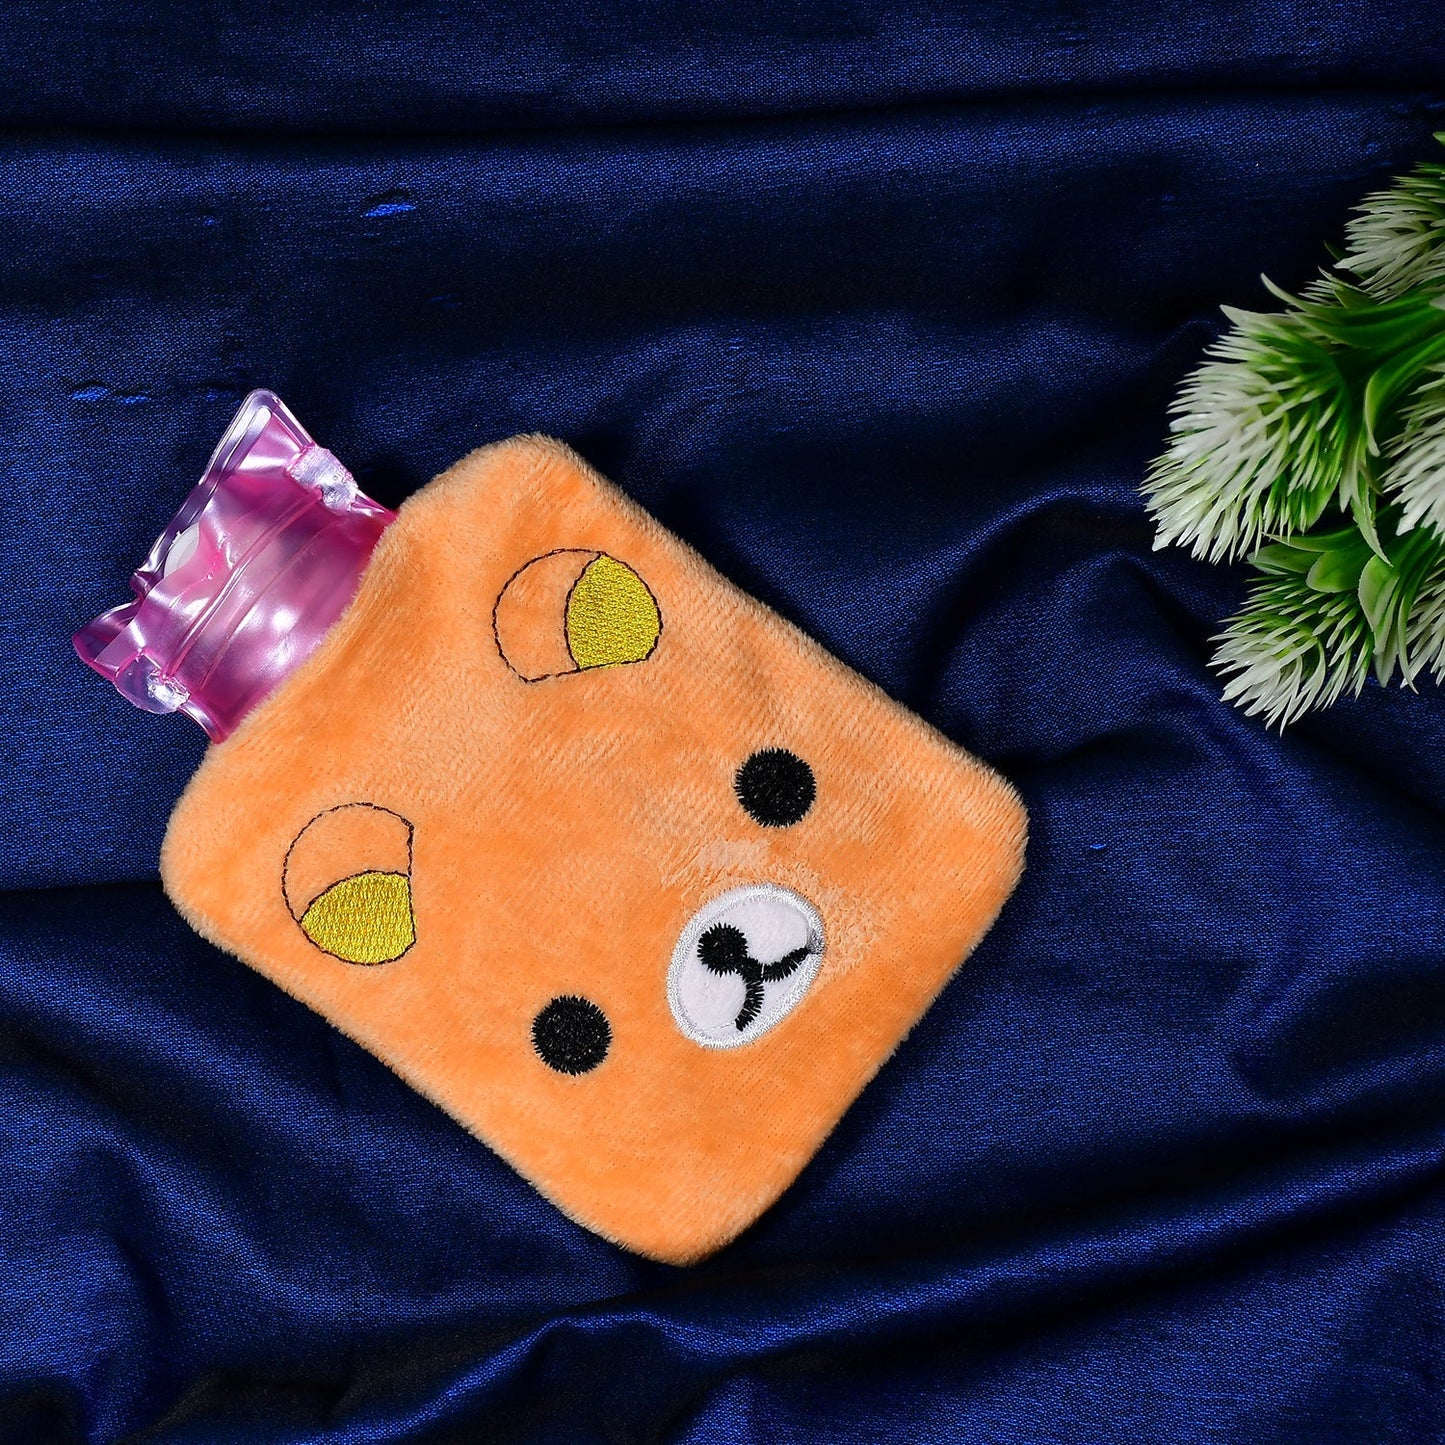 6503 Orange Panda small Hot Water Bag with Cover for Pain Relief, Neck, Shoulder Pain and Hand, Feet Warmer, Menstrual Cramps.